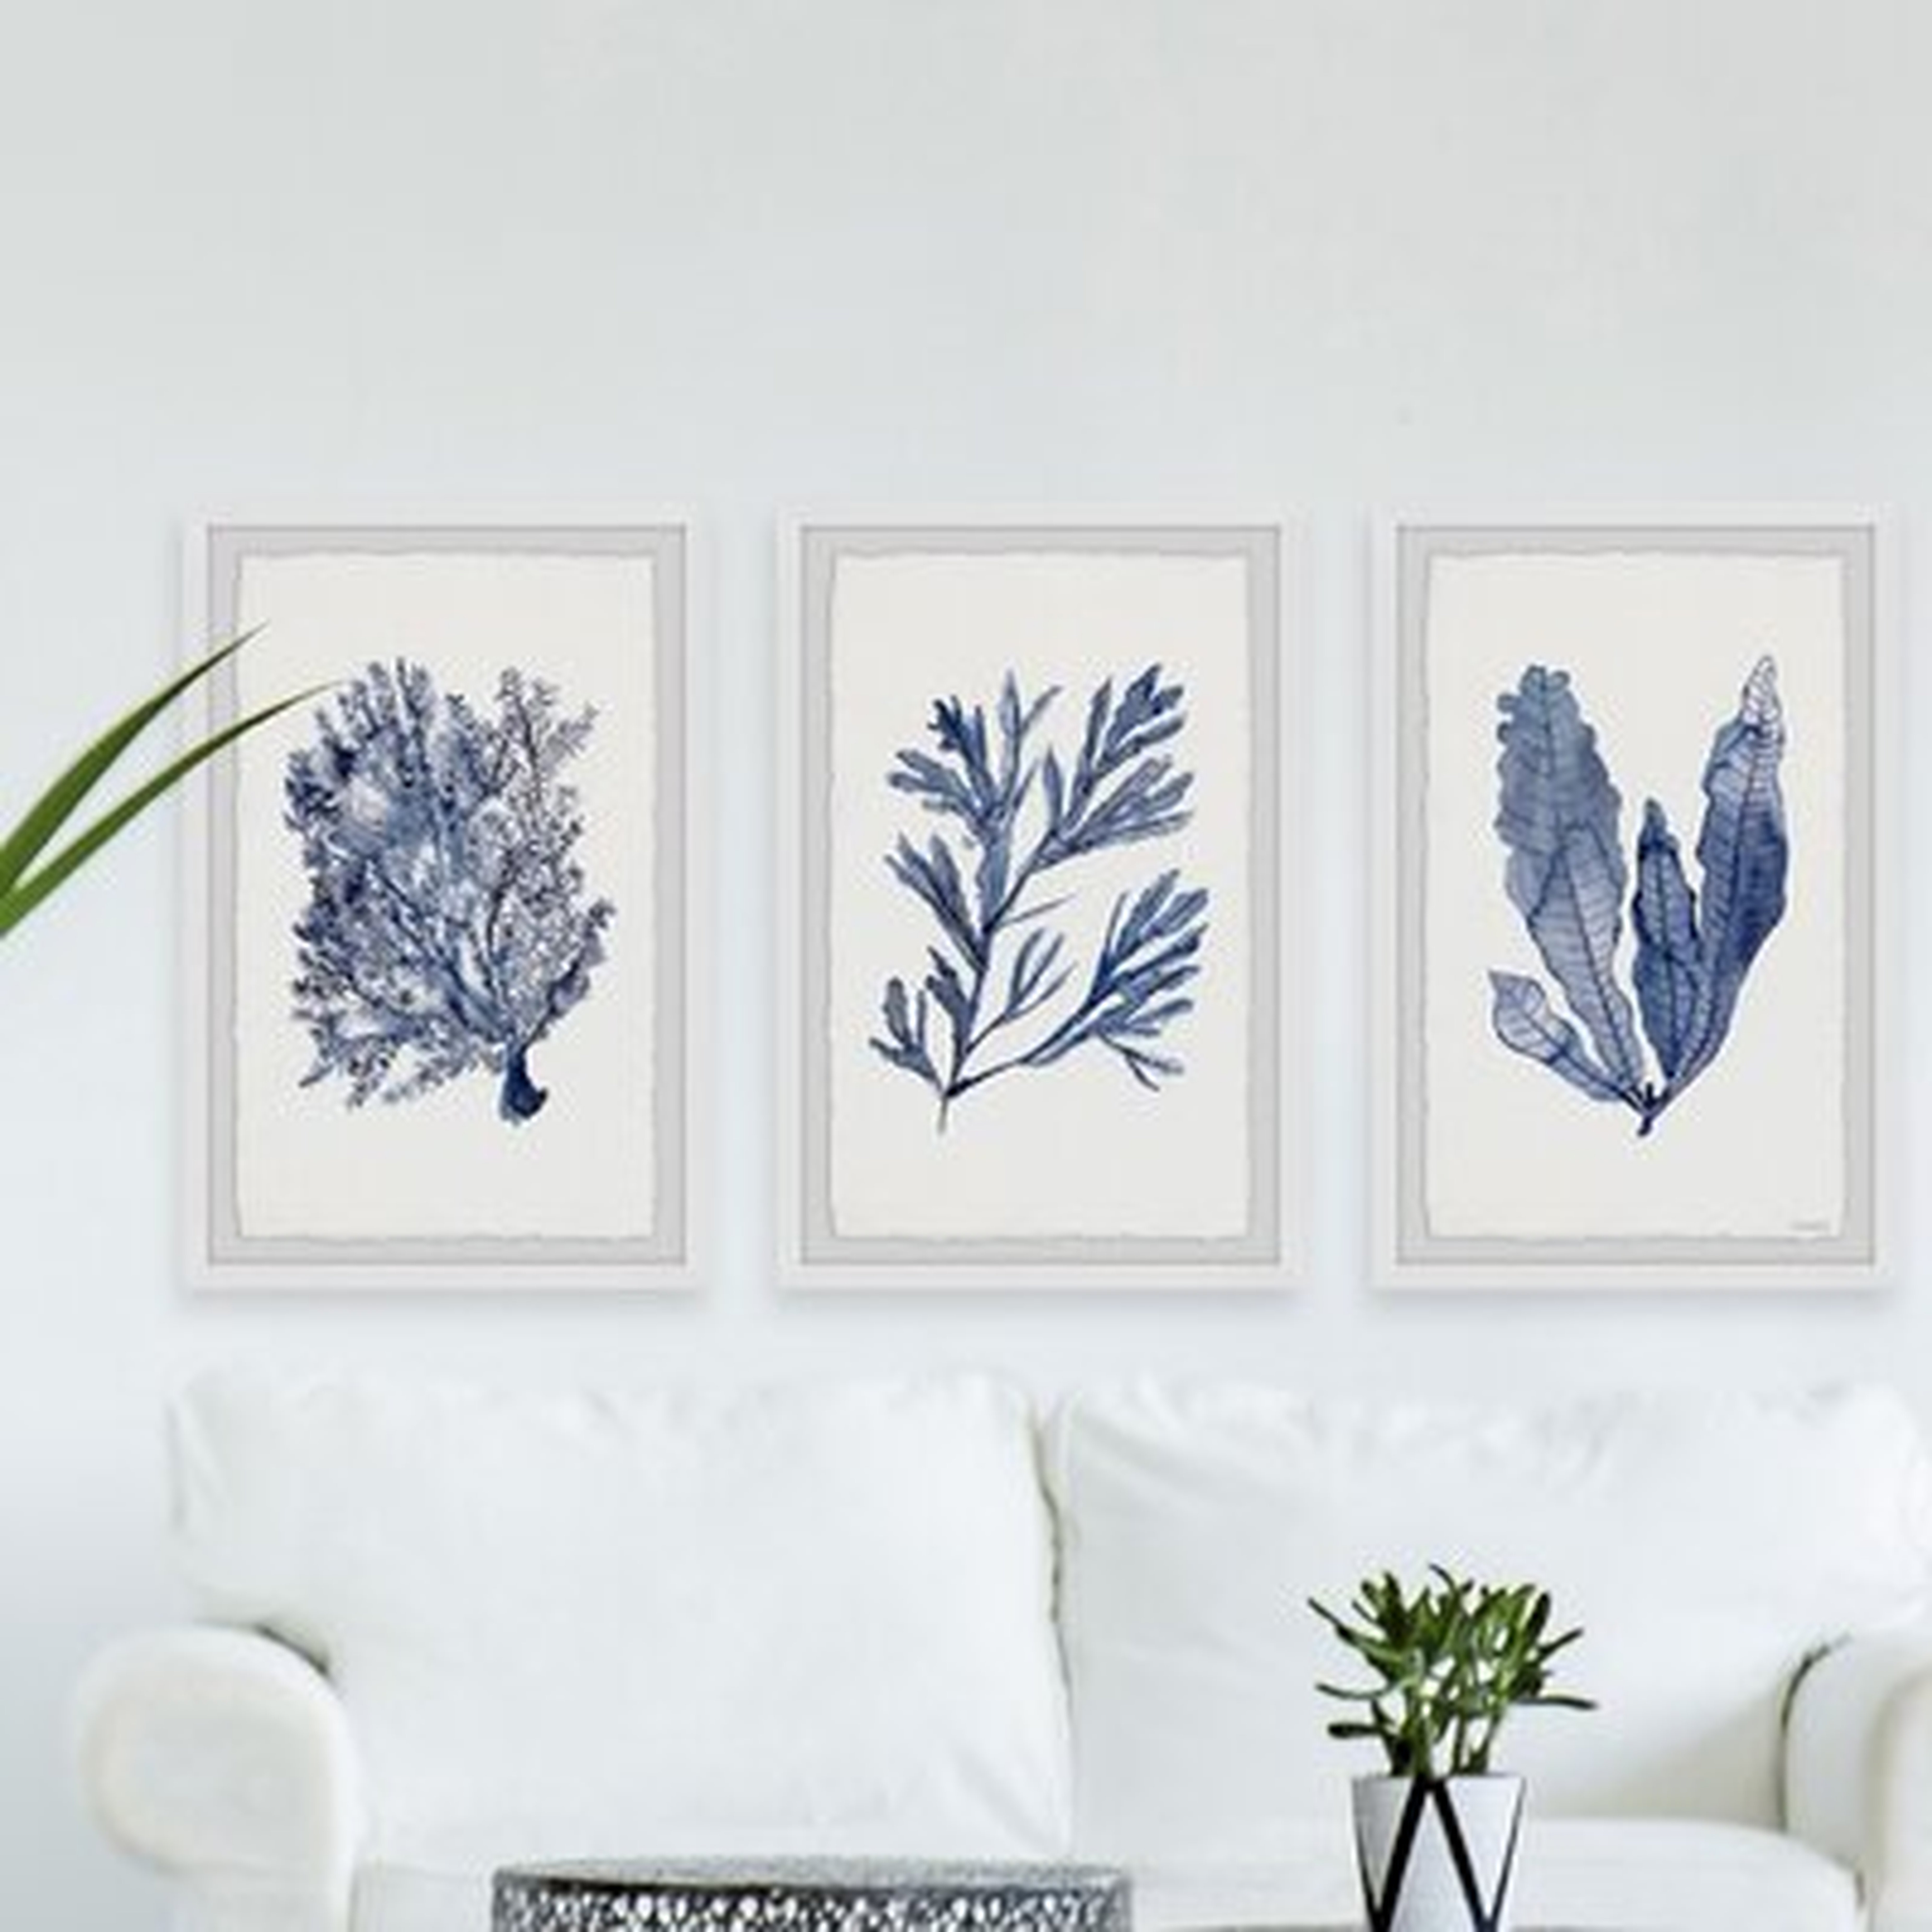 Seaweed Under Water V' by Marmont Hill - 3 Piece Picture Frame Print Set on Paper - Wayfair